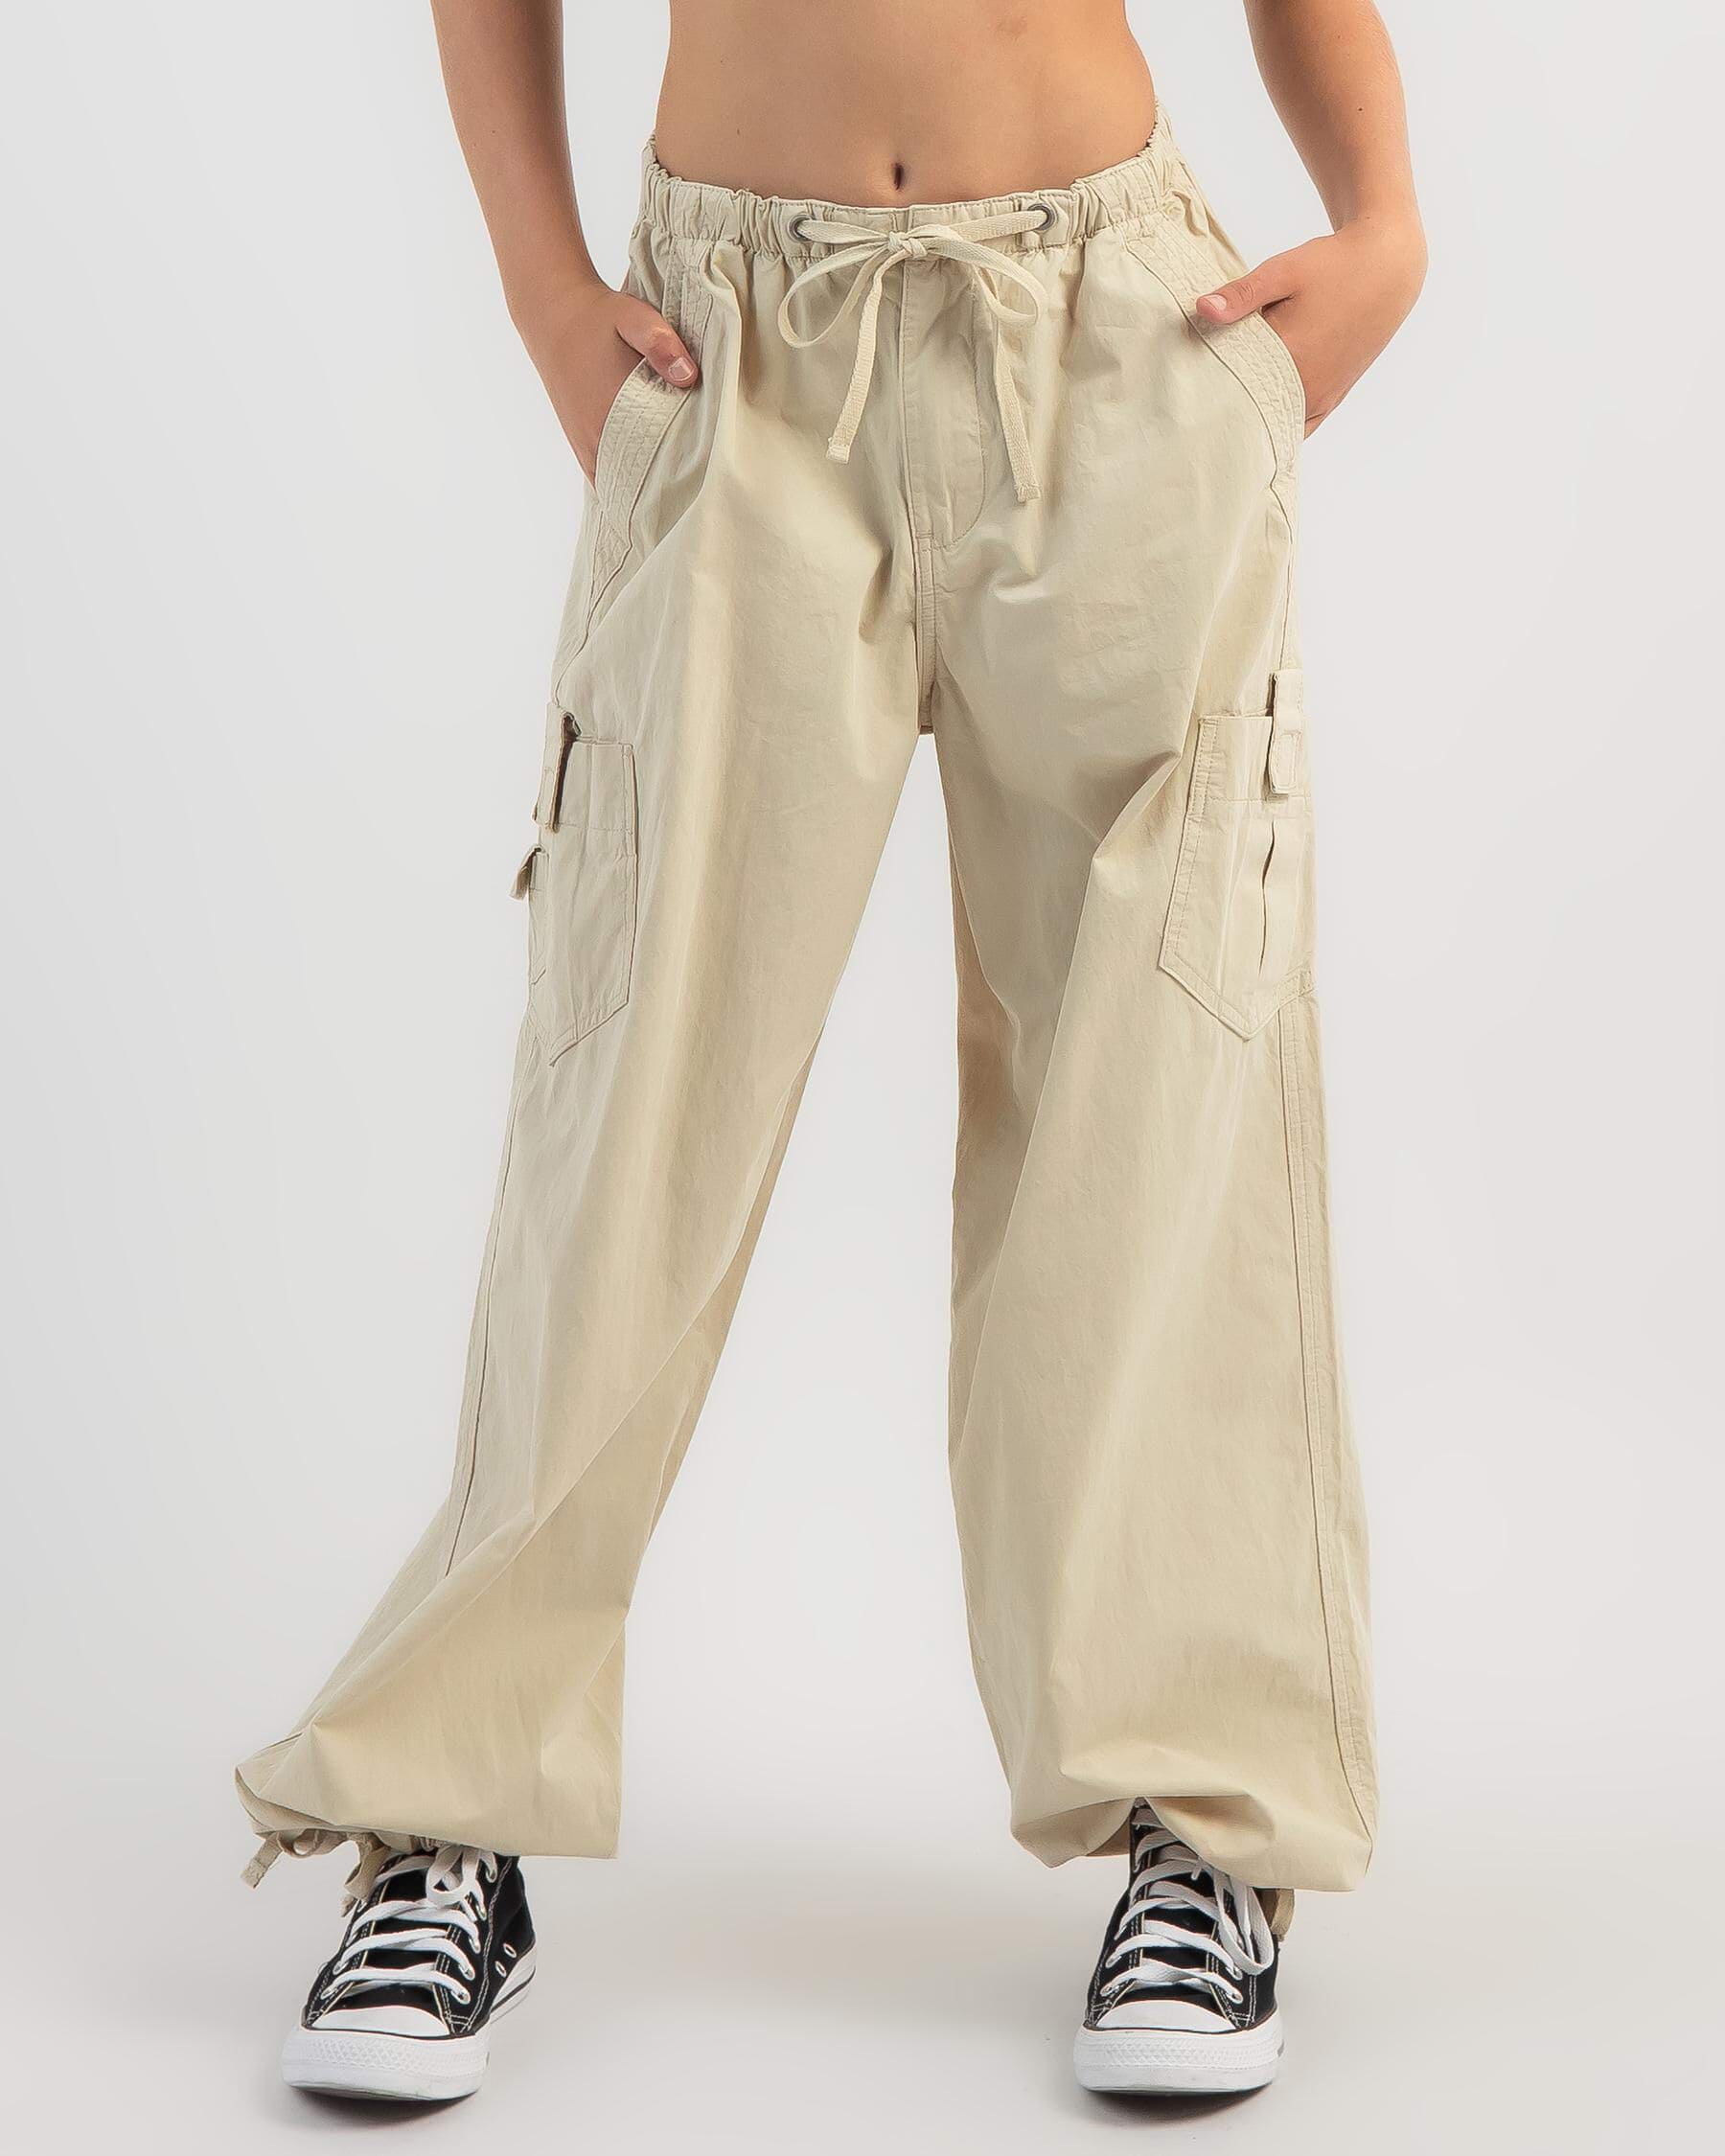 Girls' Cargo Pants Pants and Leggings - Up to 75% OFF - Buy Cargo Pants  Pants and Leggings for Girls Online - Doha, other cities, Qatar - Namshi